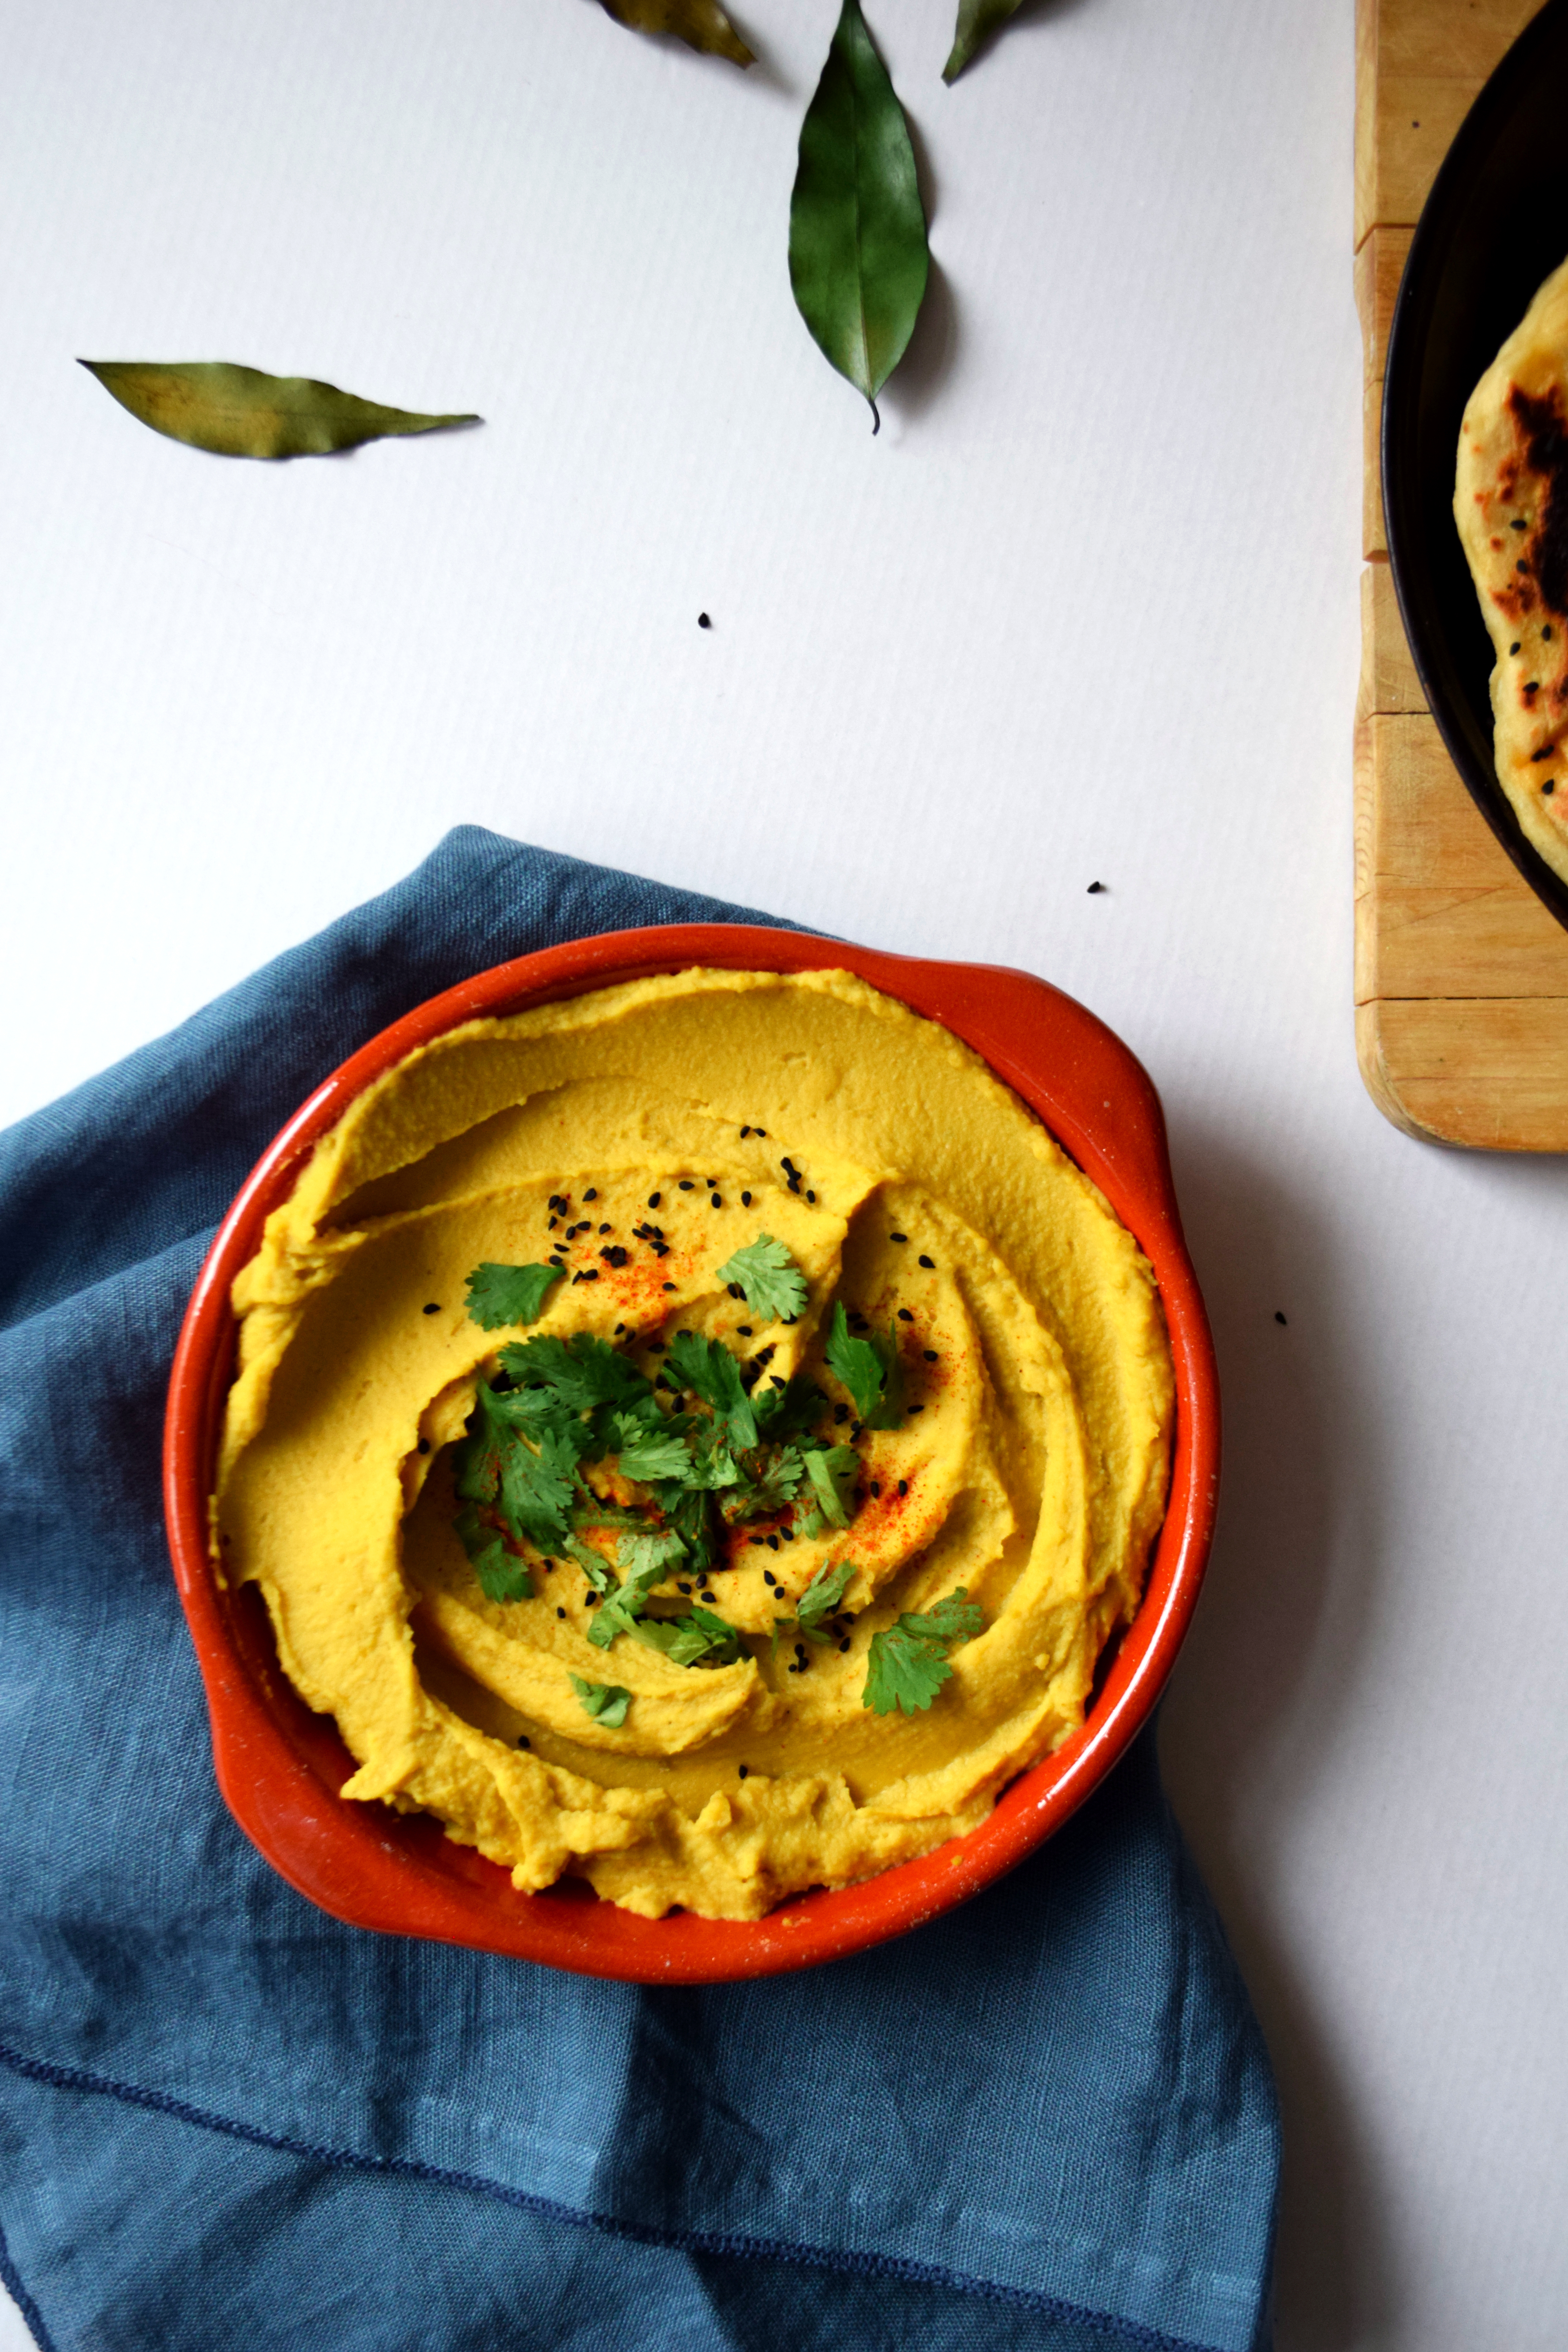 Naans & red lentils hummus with coconut & curry